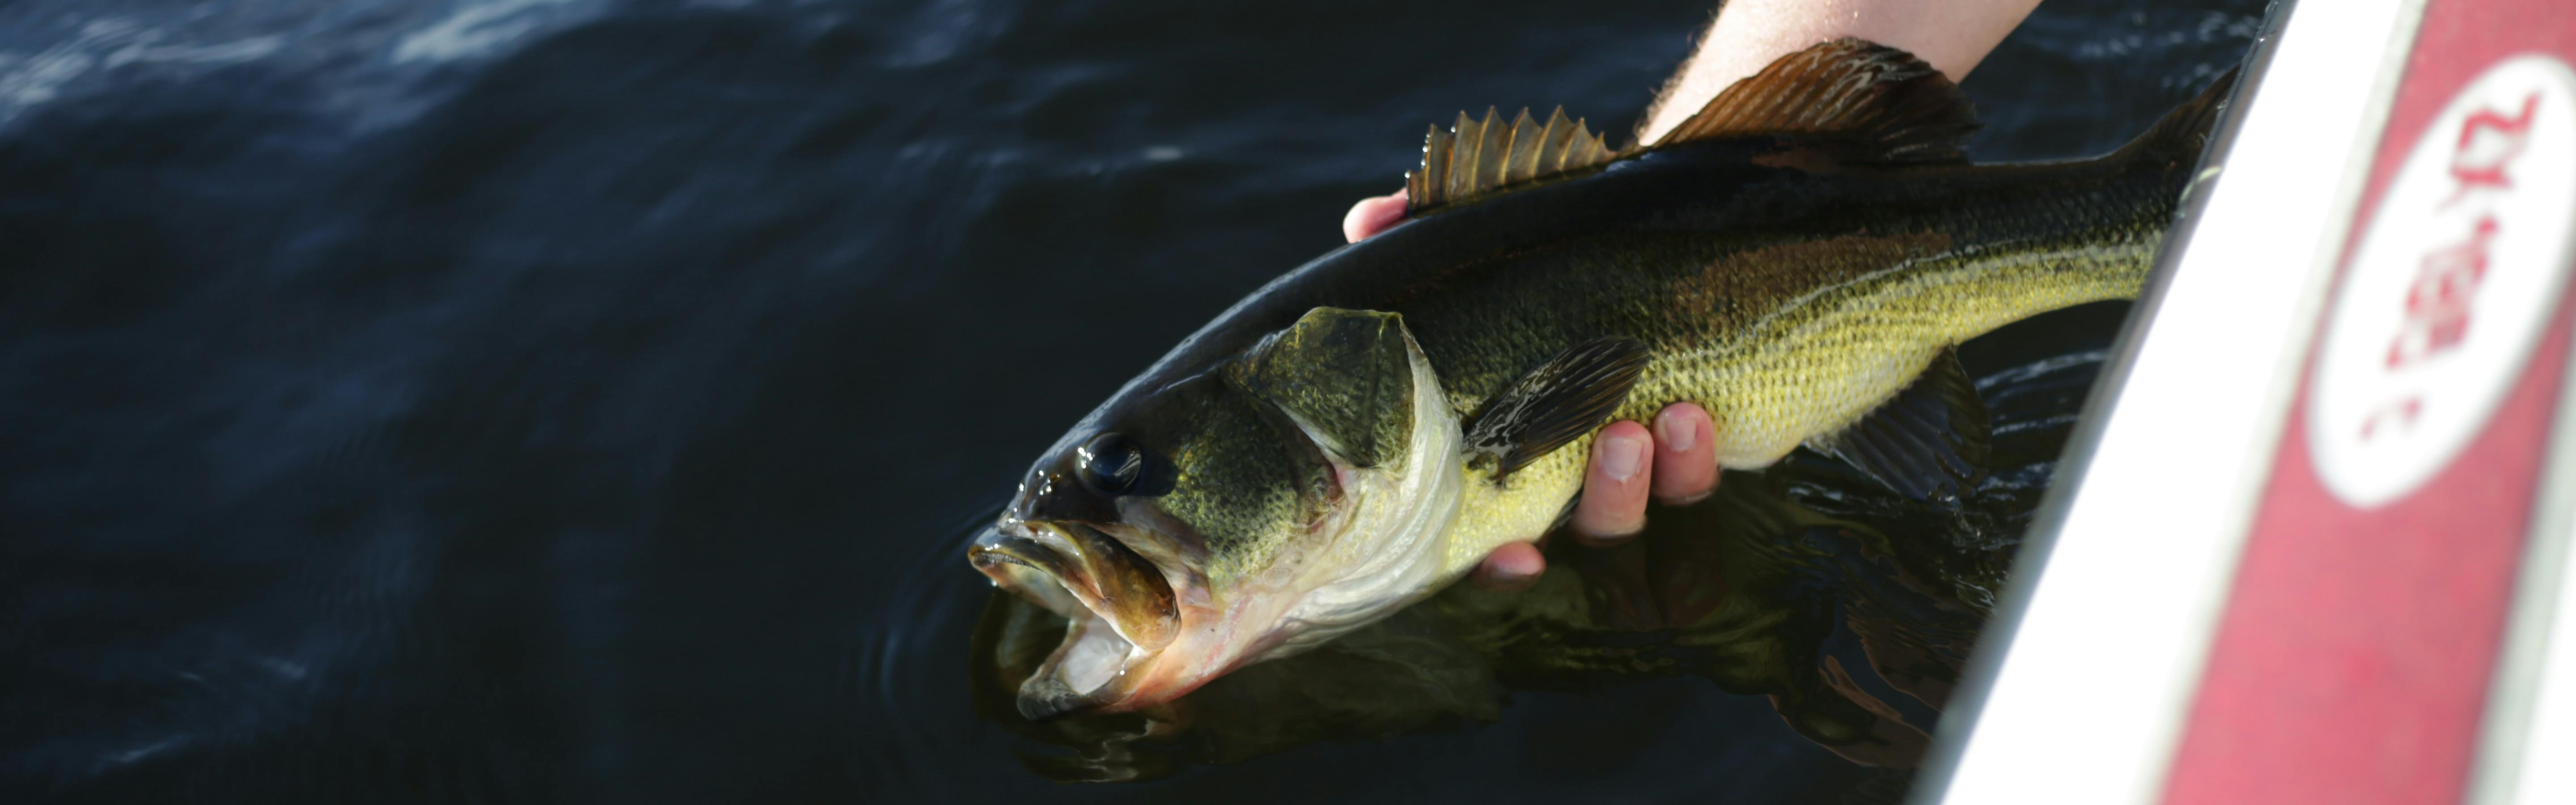 Fishing Lures 101: The Different Lure Types and How to Choose